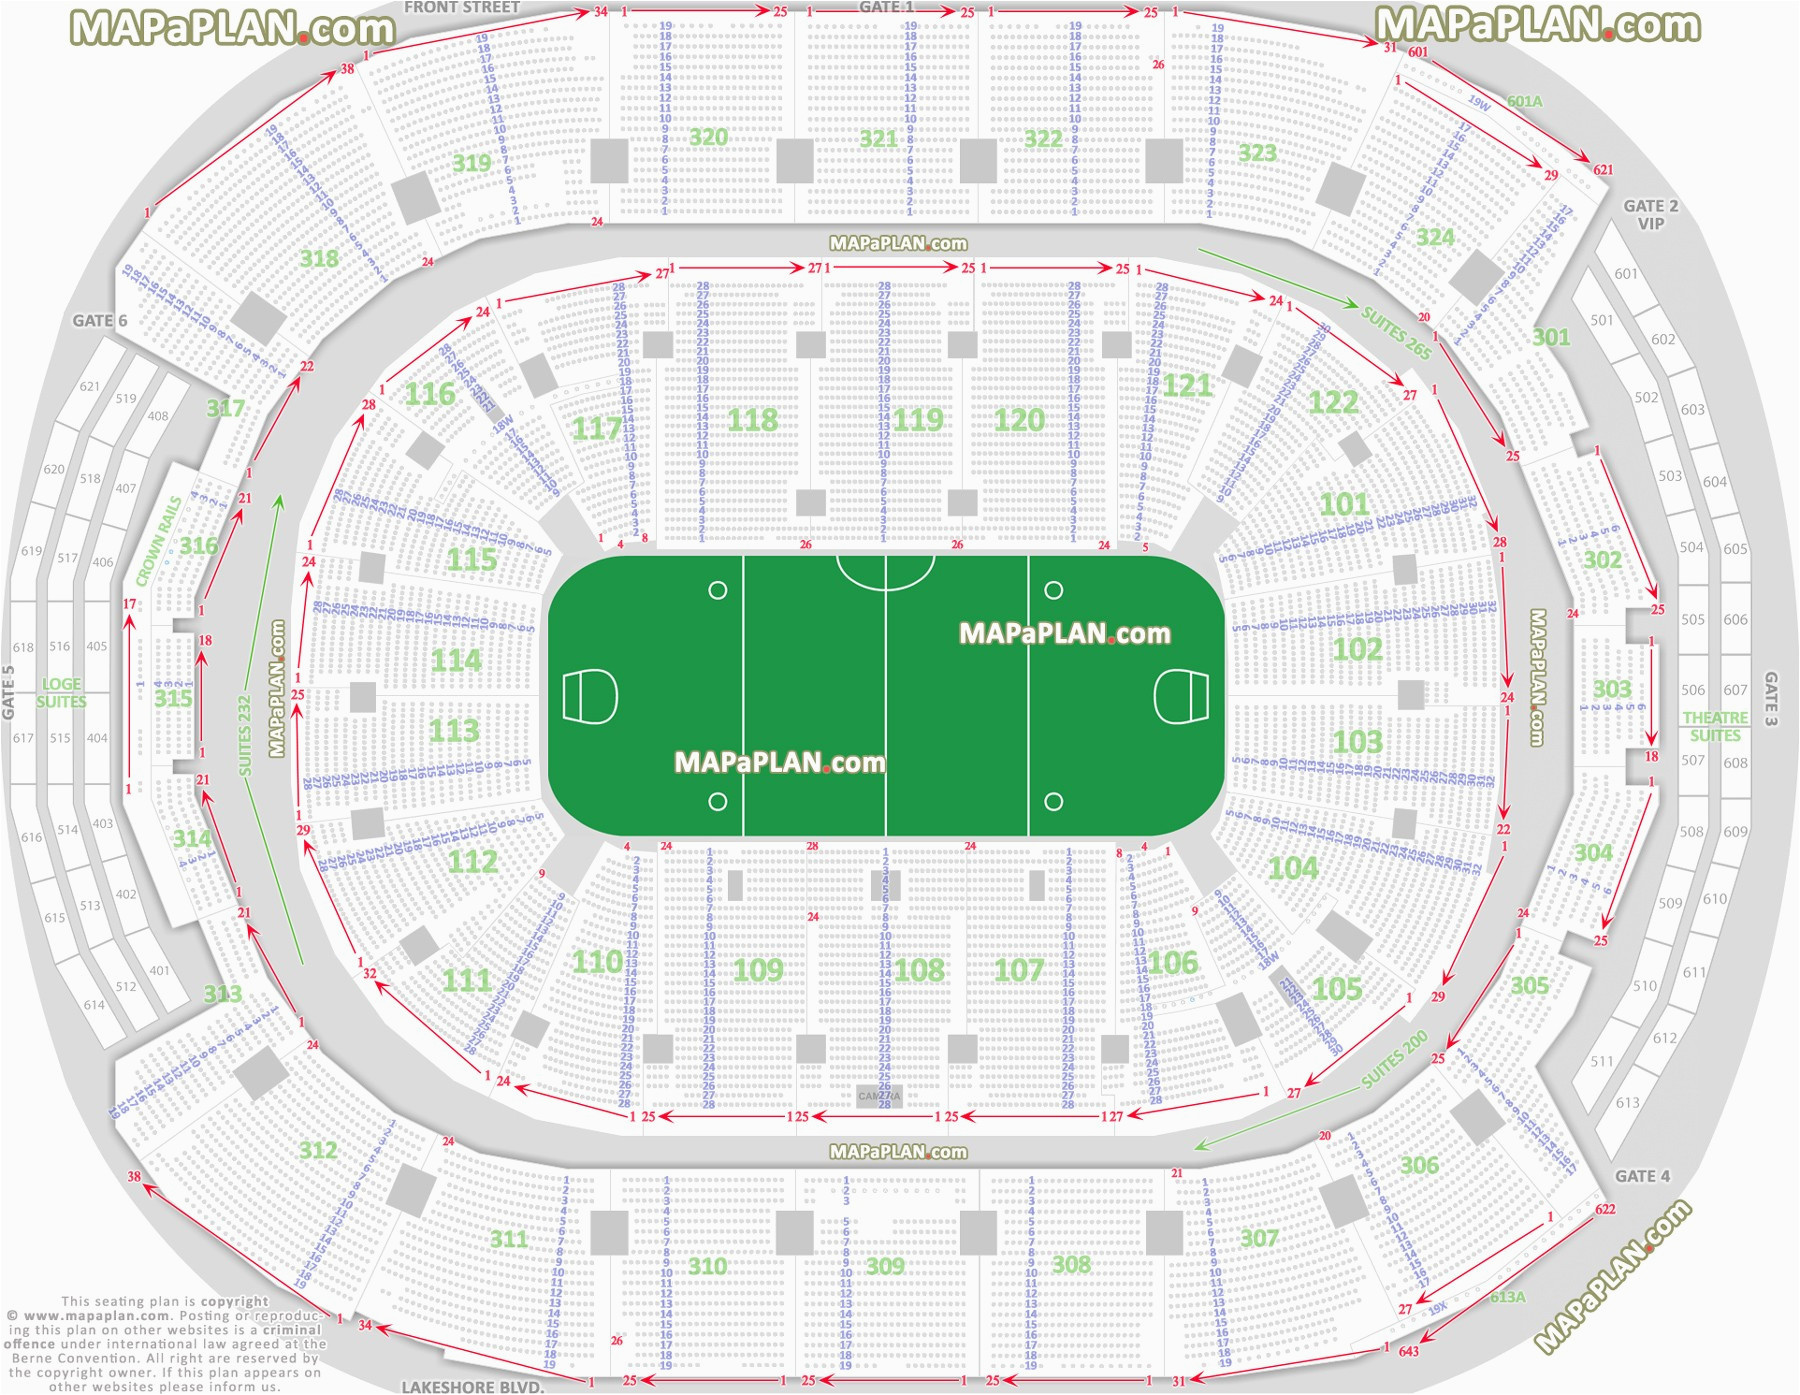 Rogers Centre Seating Chart With Seat Numbers